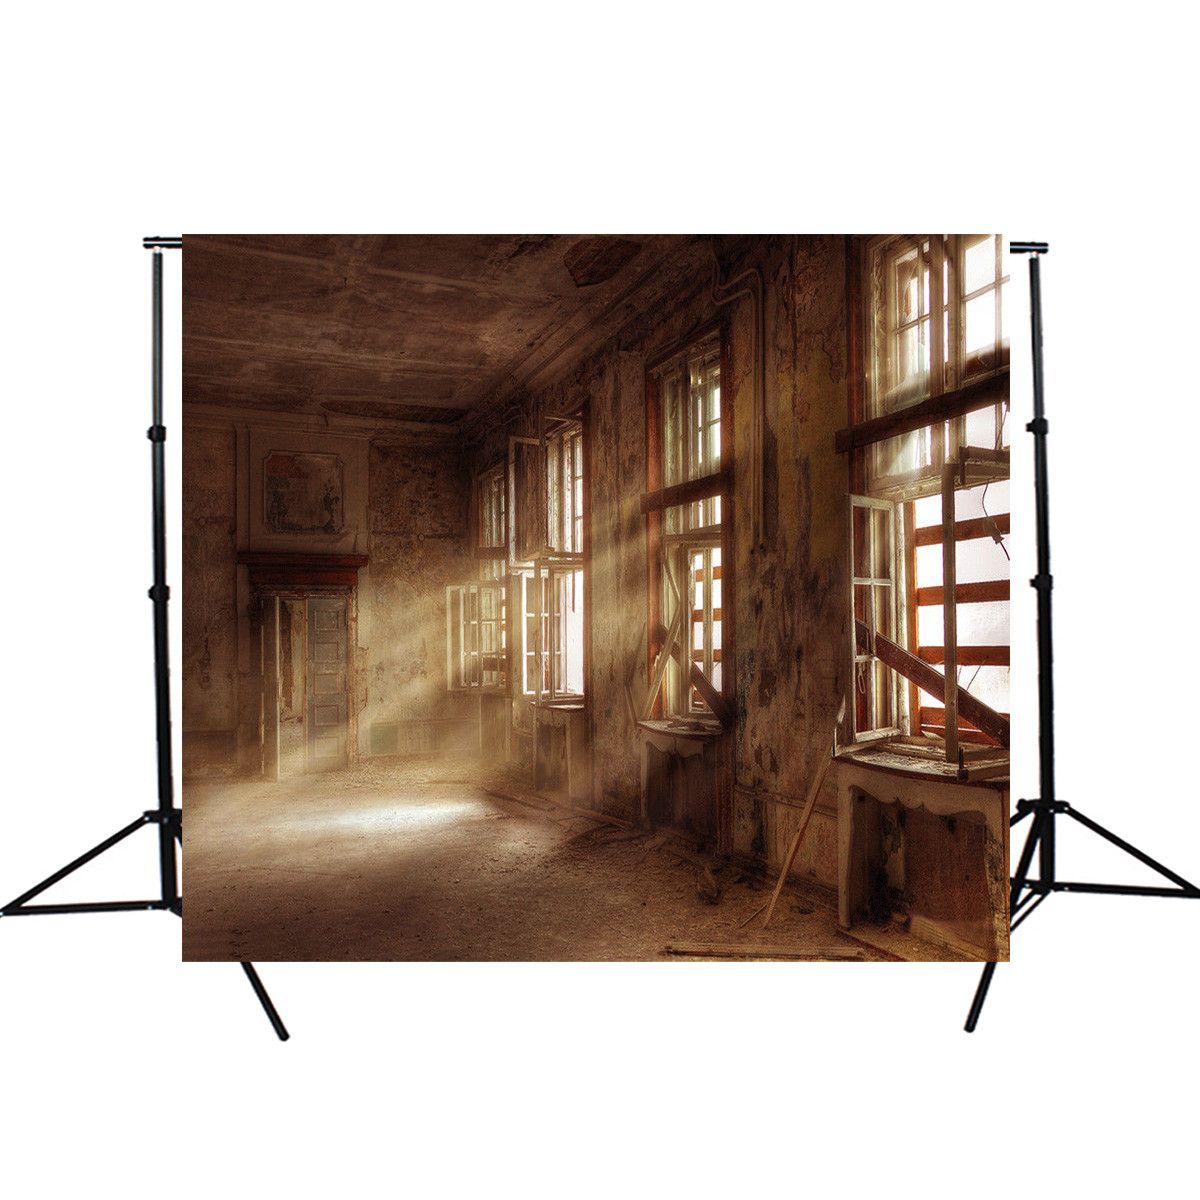 Ruins-Factory-Theme-Vinyl-Photography-Background-Backdrop-for-Studio-Photo-7x5ft-1168245